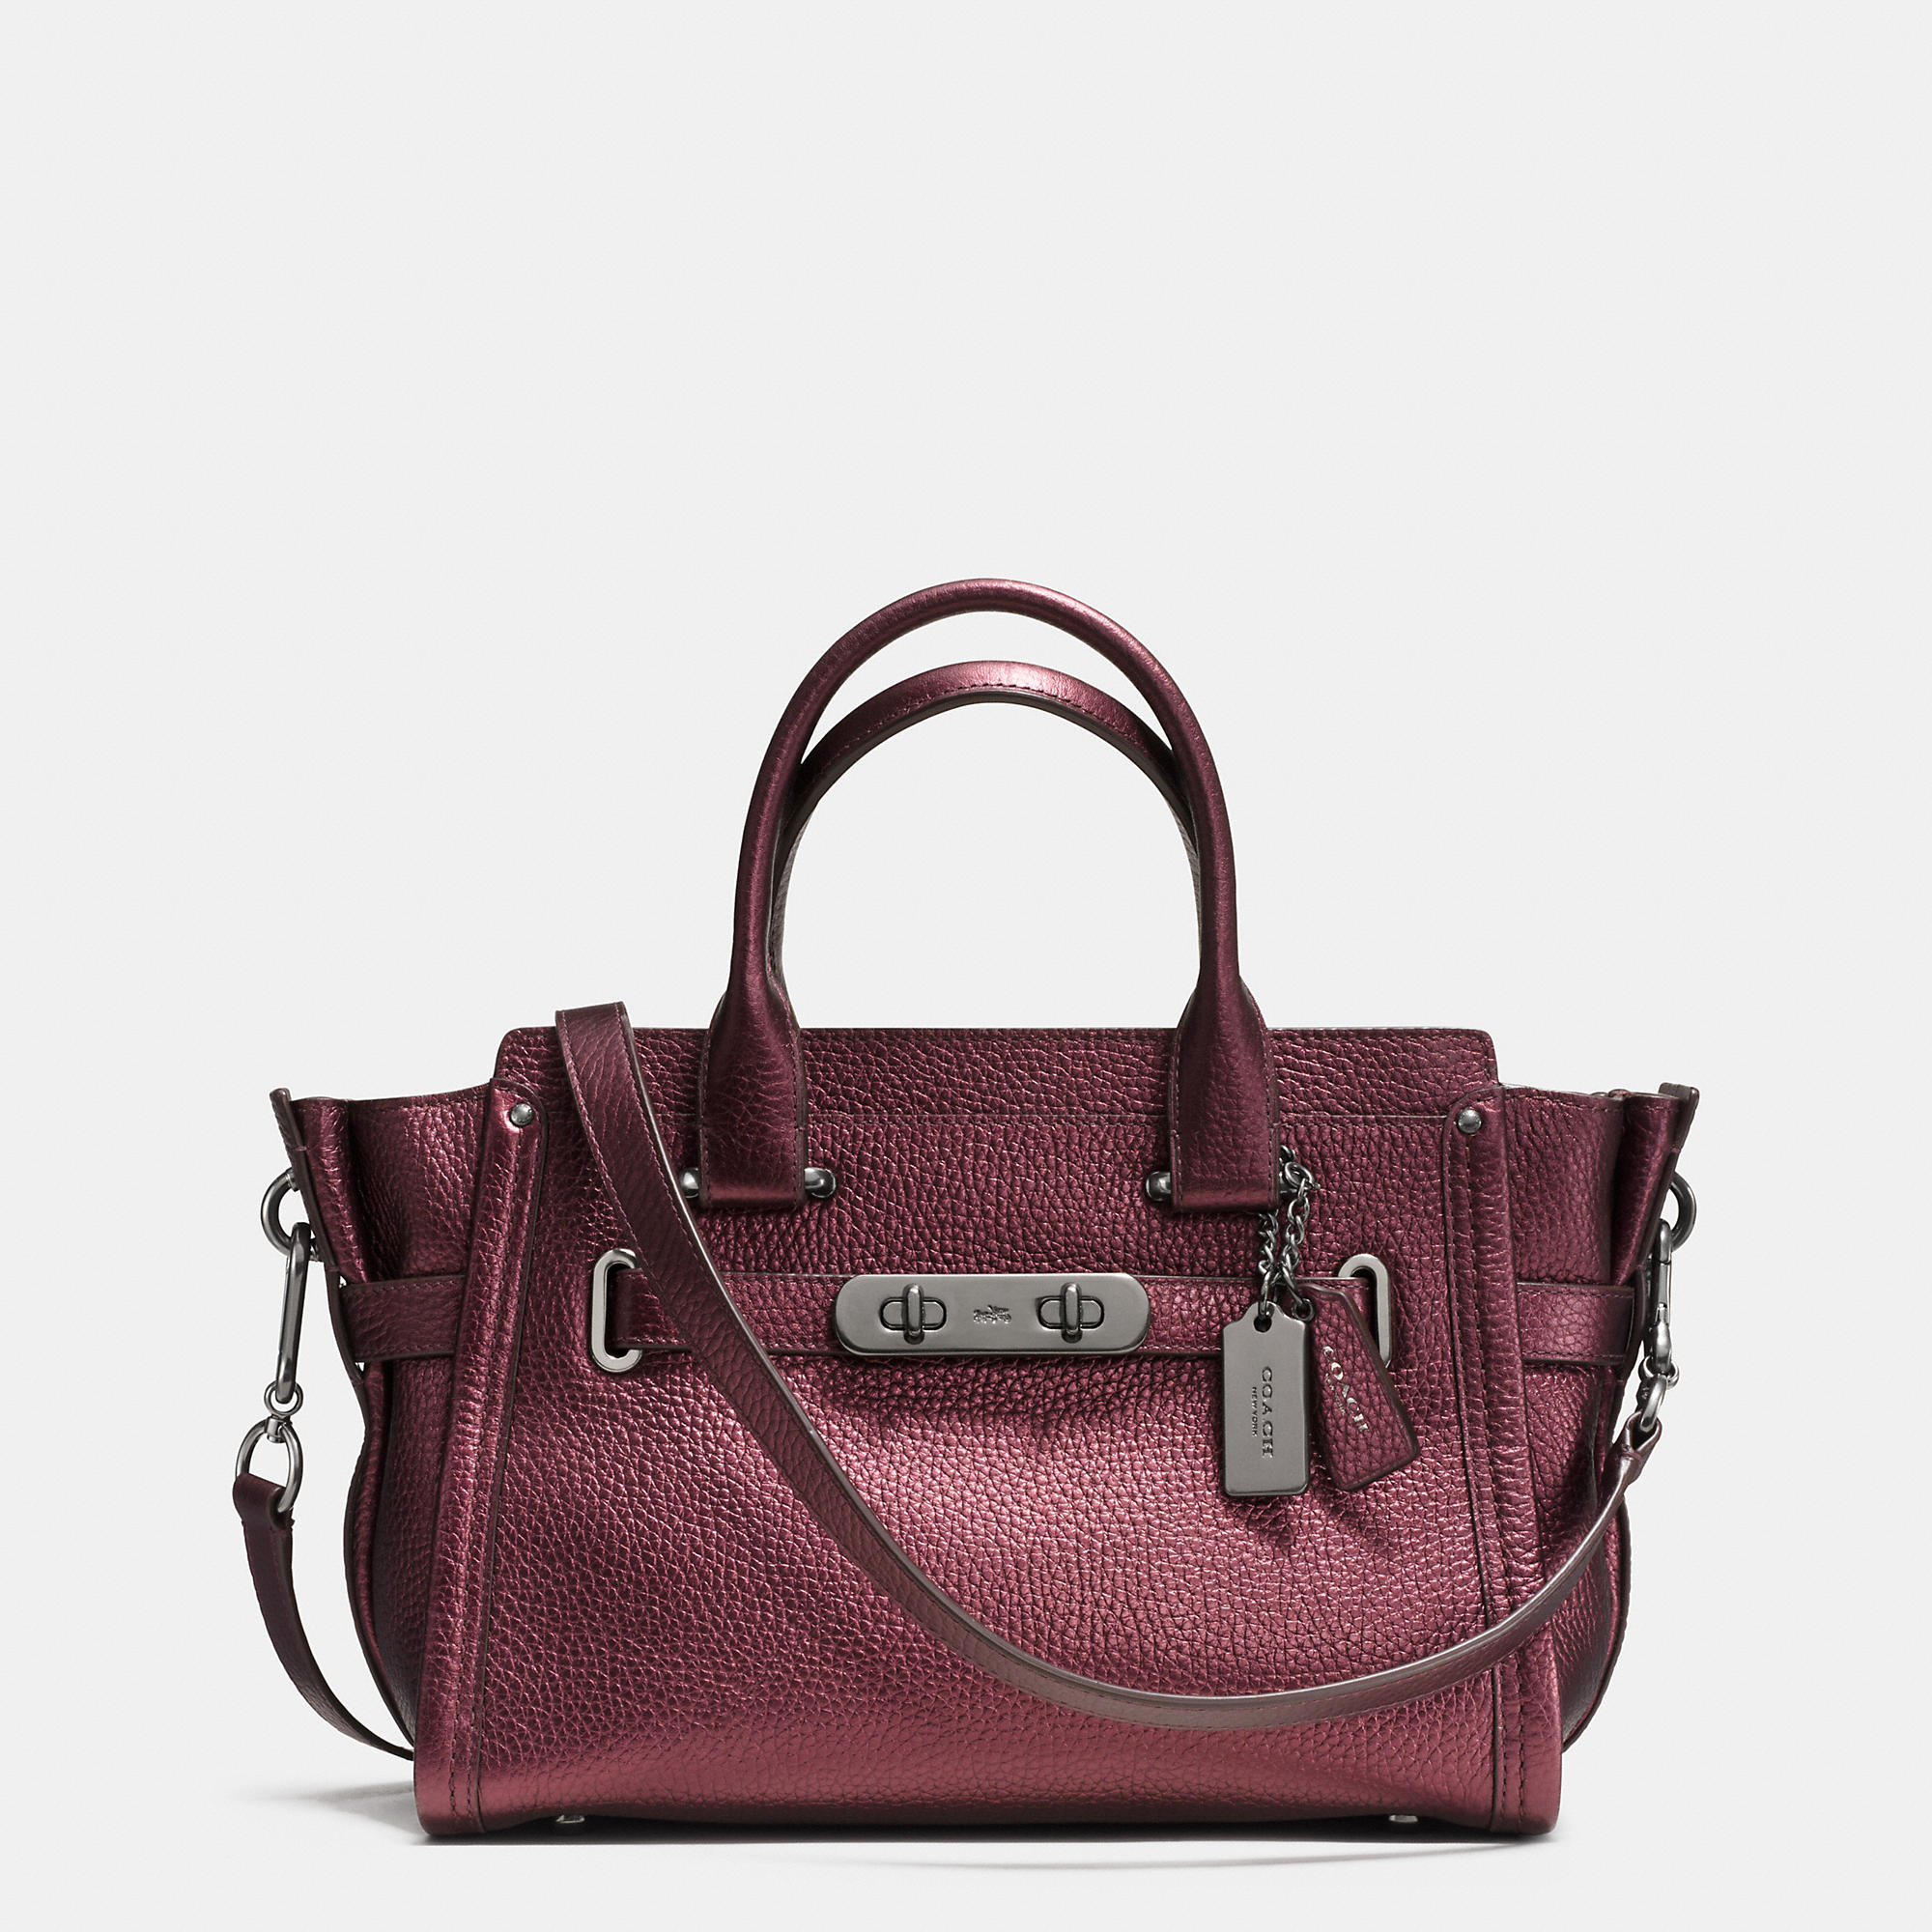 COACH Designer Handbags | Coach Swagger 27 In Croc Embossed Leather